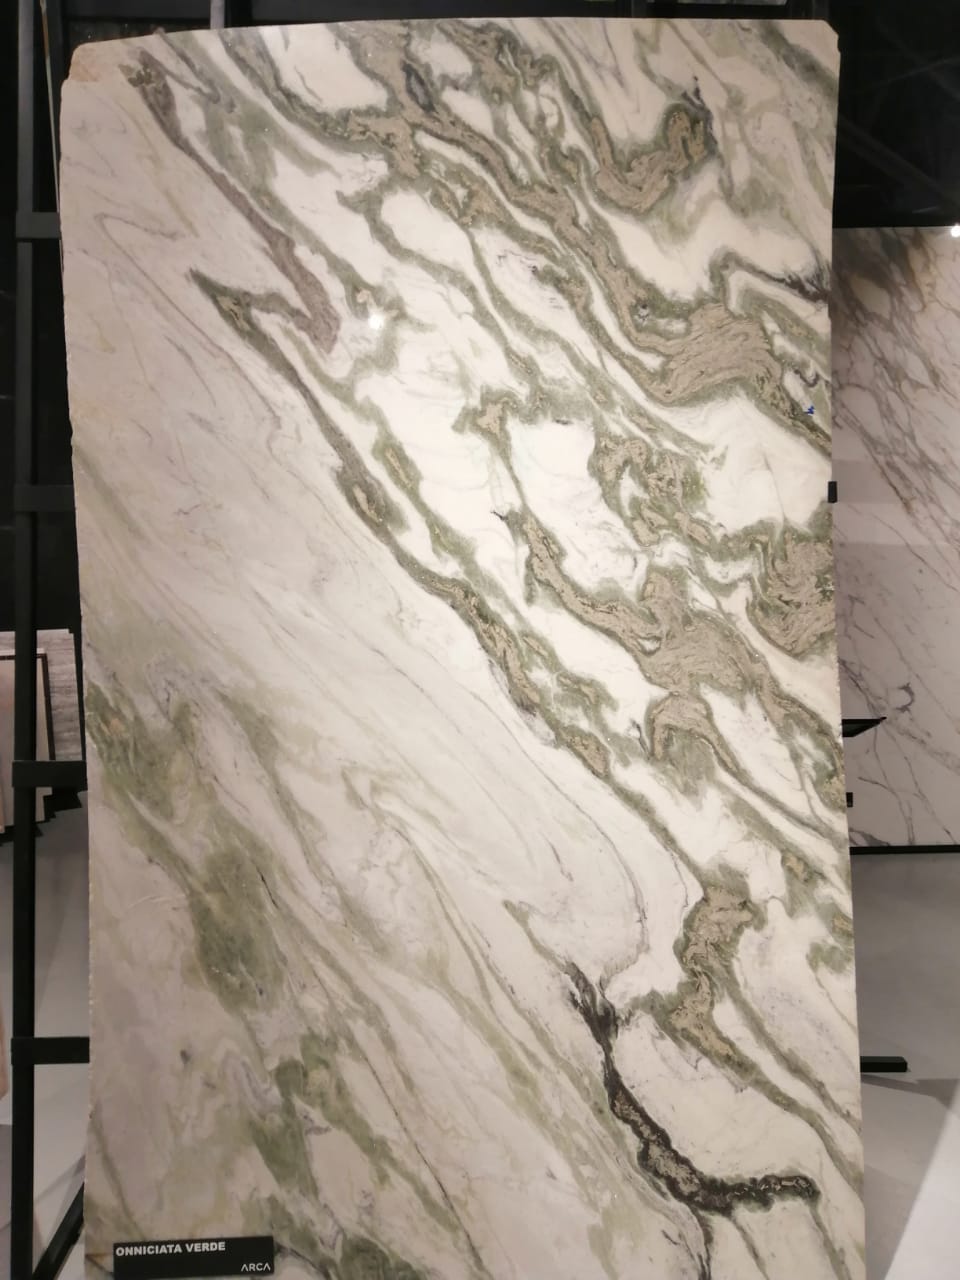 Palacio de Hierro Moliere – Leader and Supplier of Natural Stone, Marble  and Wood Floors - Grupo Arca